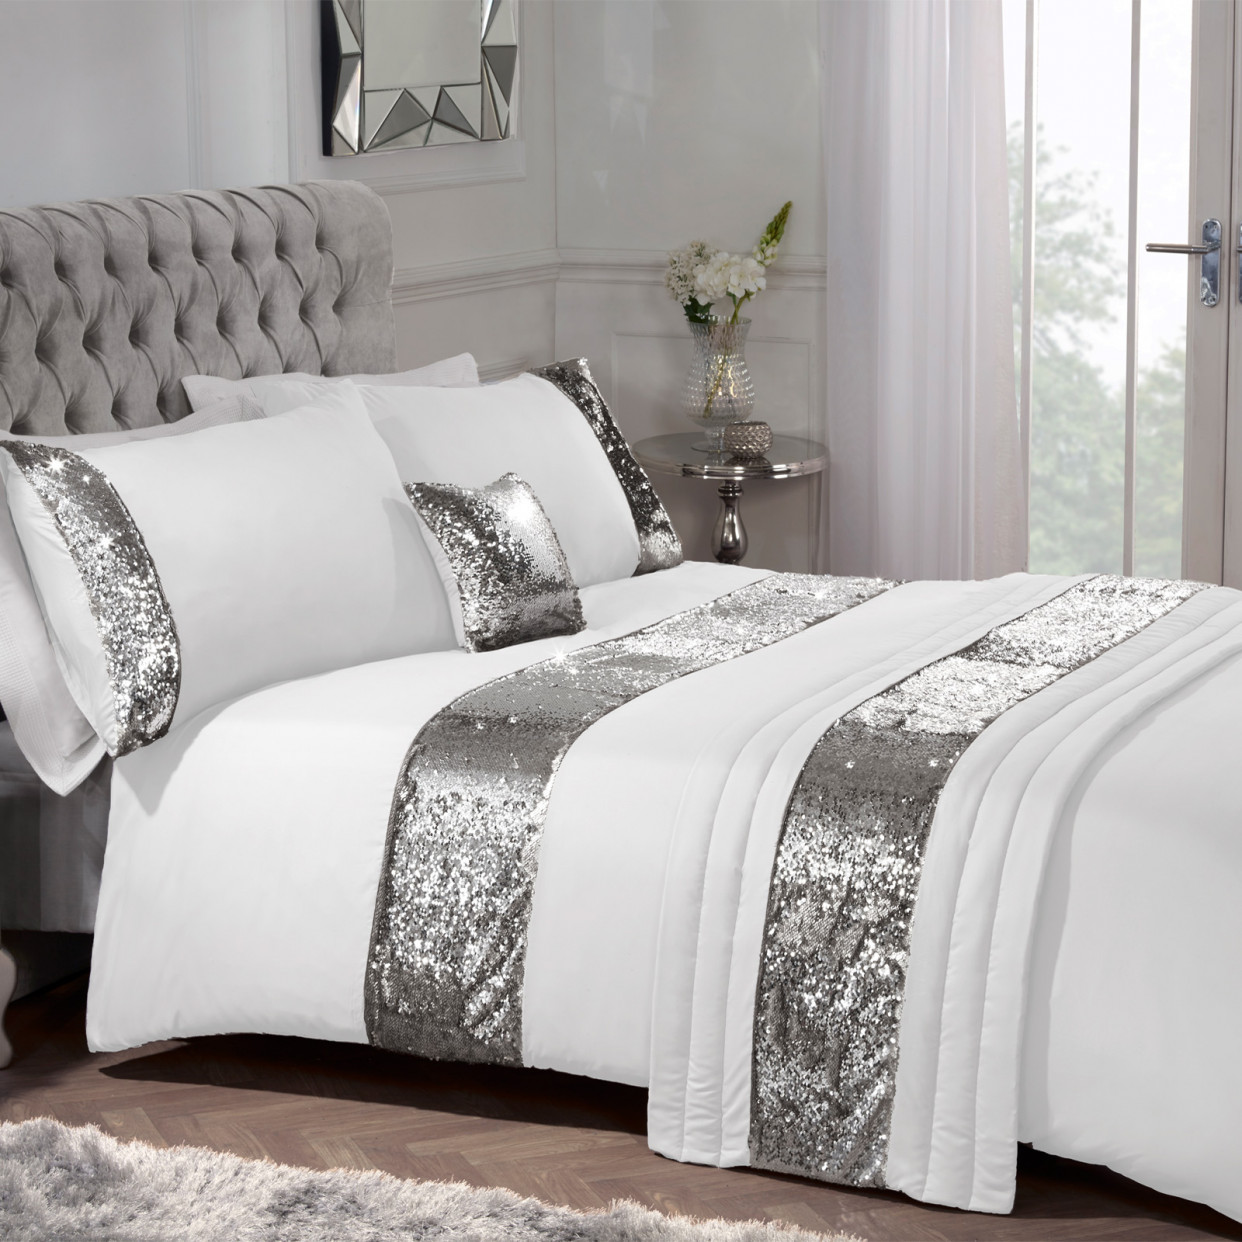 Sienna Mermaid Sequin Complete Bed in Bag - White/Silver>